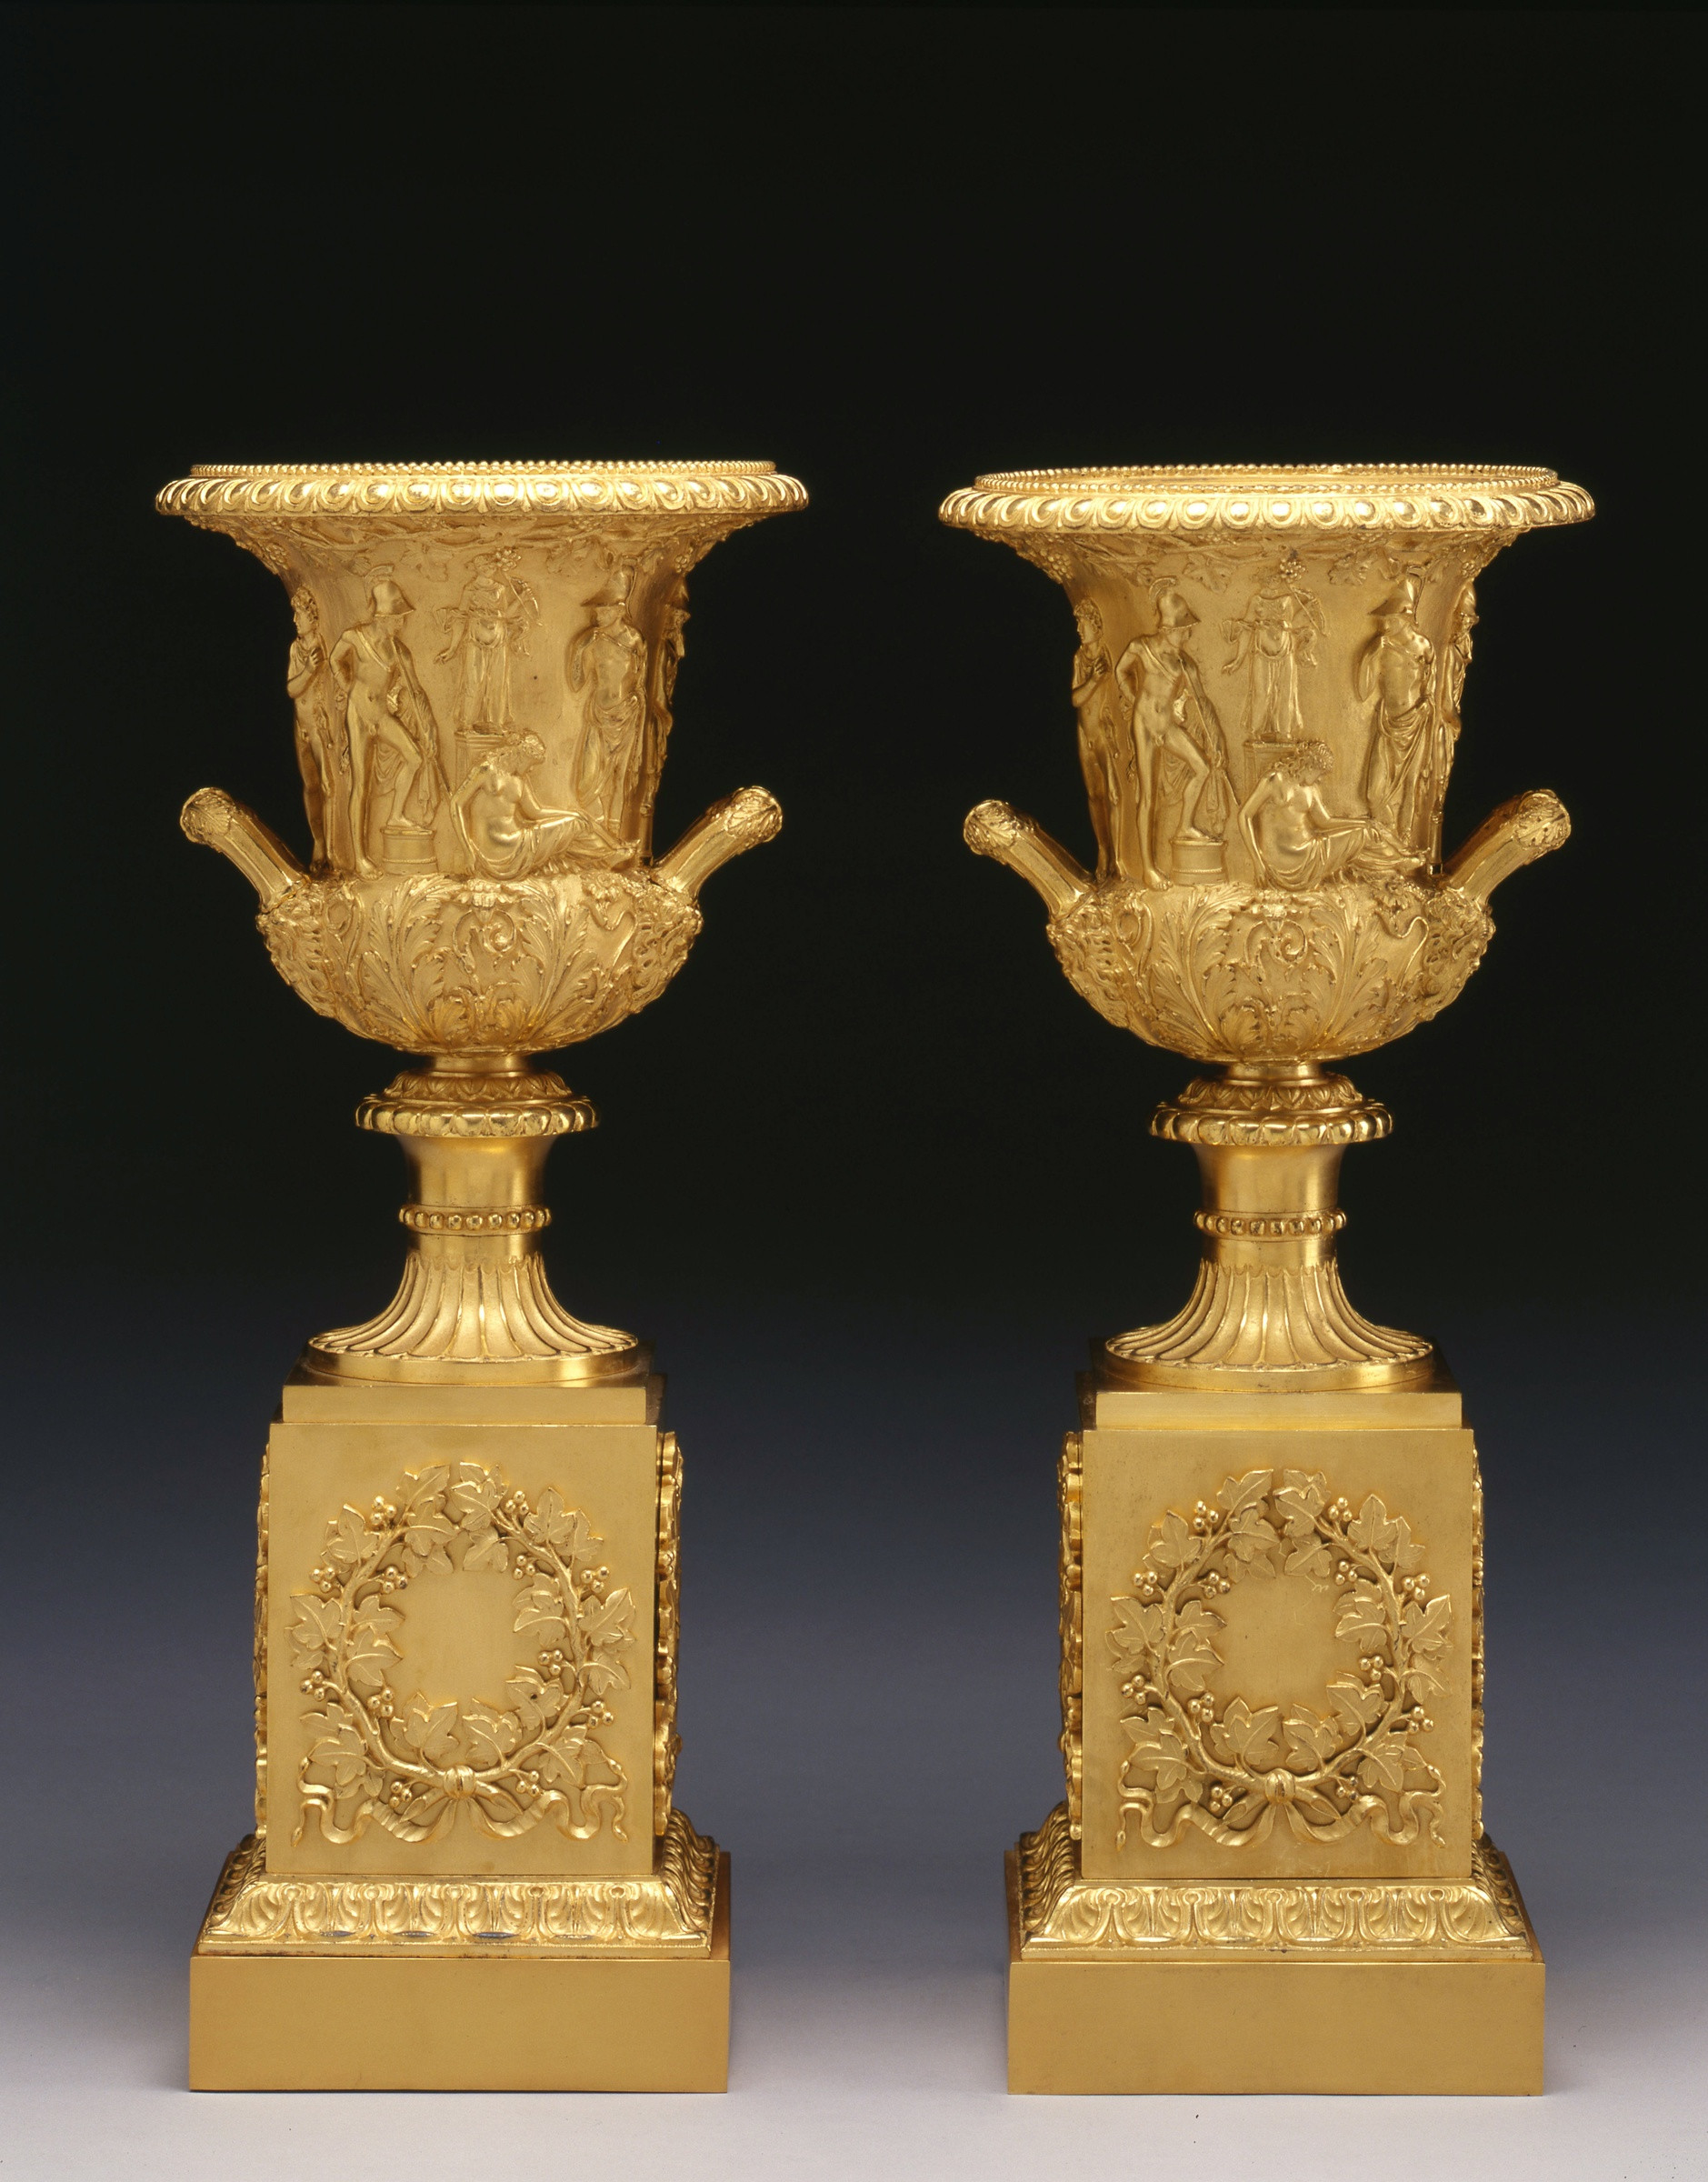 16 Spectacular Large Brass Vase 2024 free download large brass vase of pierre philippe thomire attributed to a pair of empire medici for a pair of empire medici vases on pedestals attributed to pierre philippe thomire